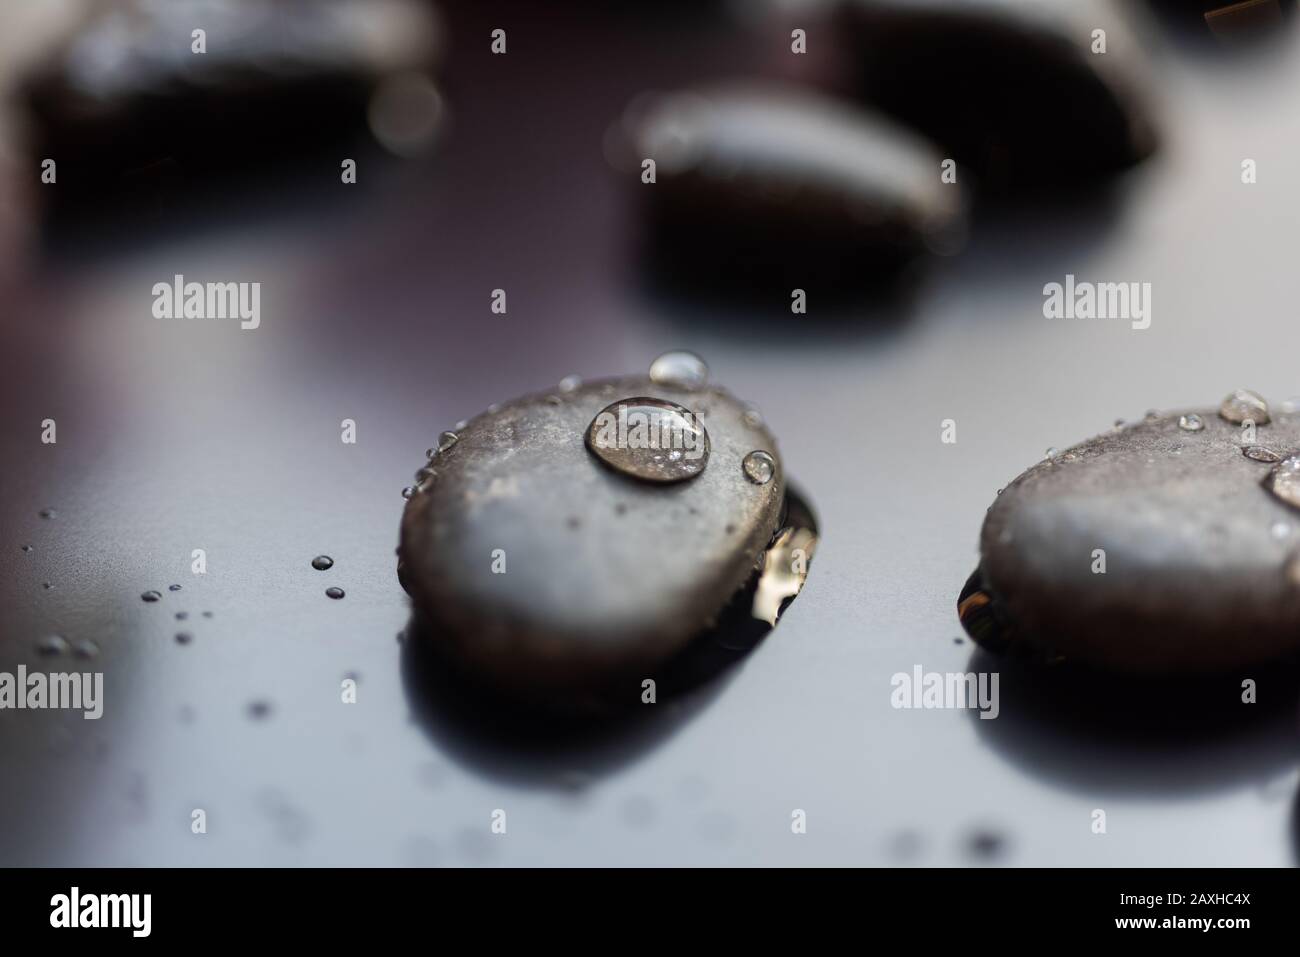 Water droplet on pebble concept Stock Photo